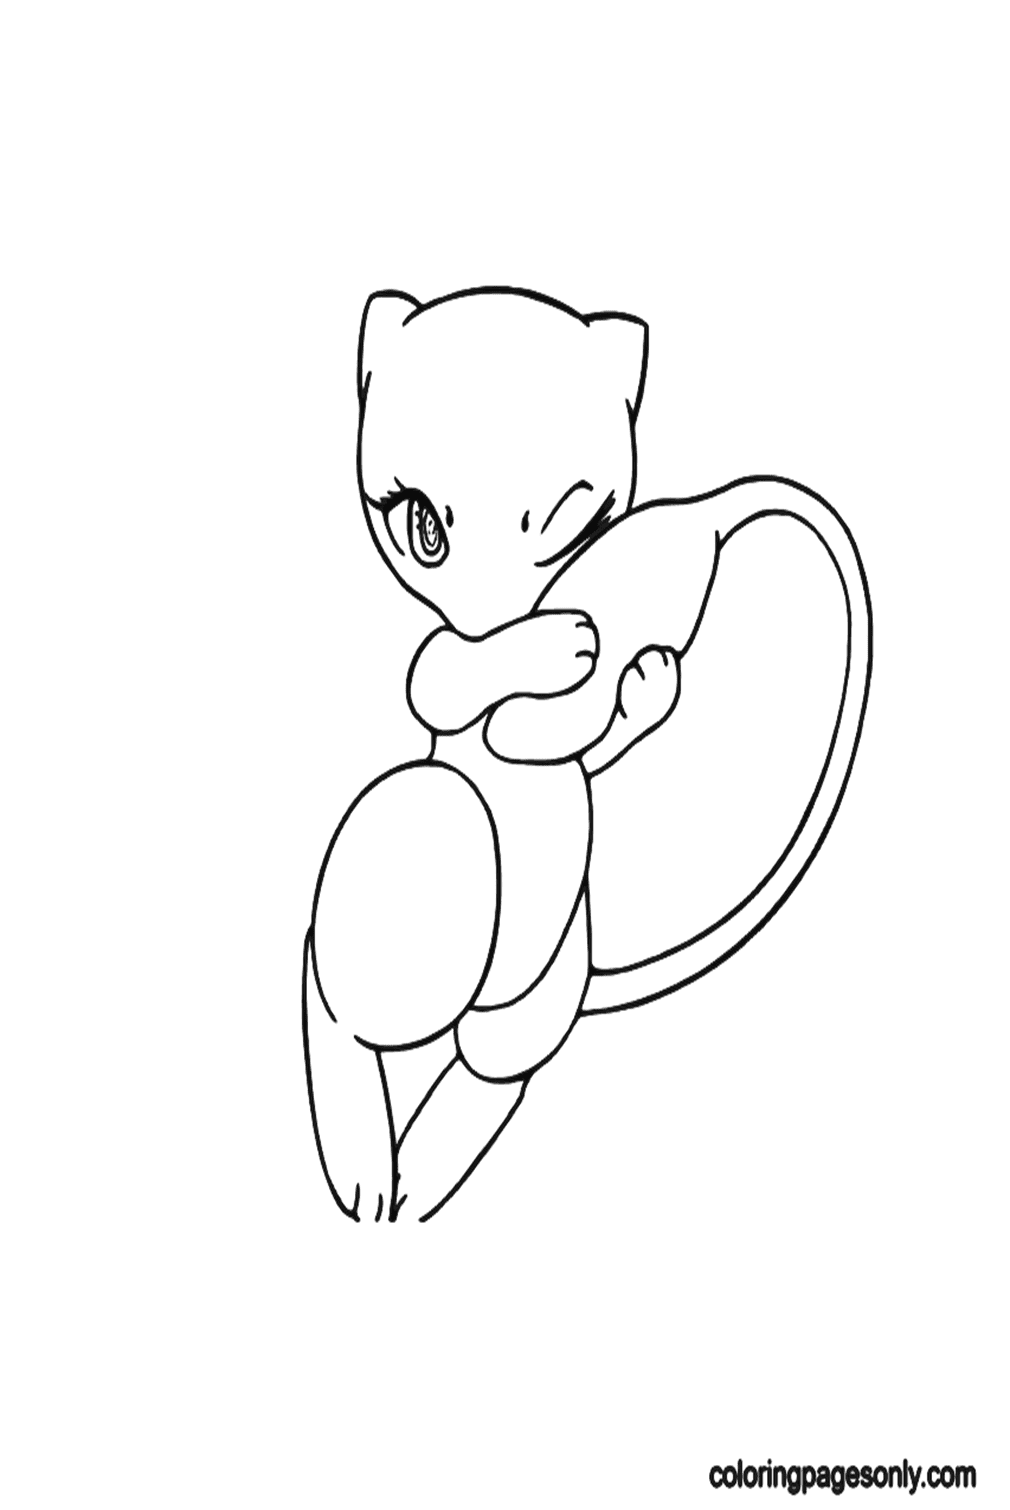 Images For Free Pokemon Mew from Mew